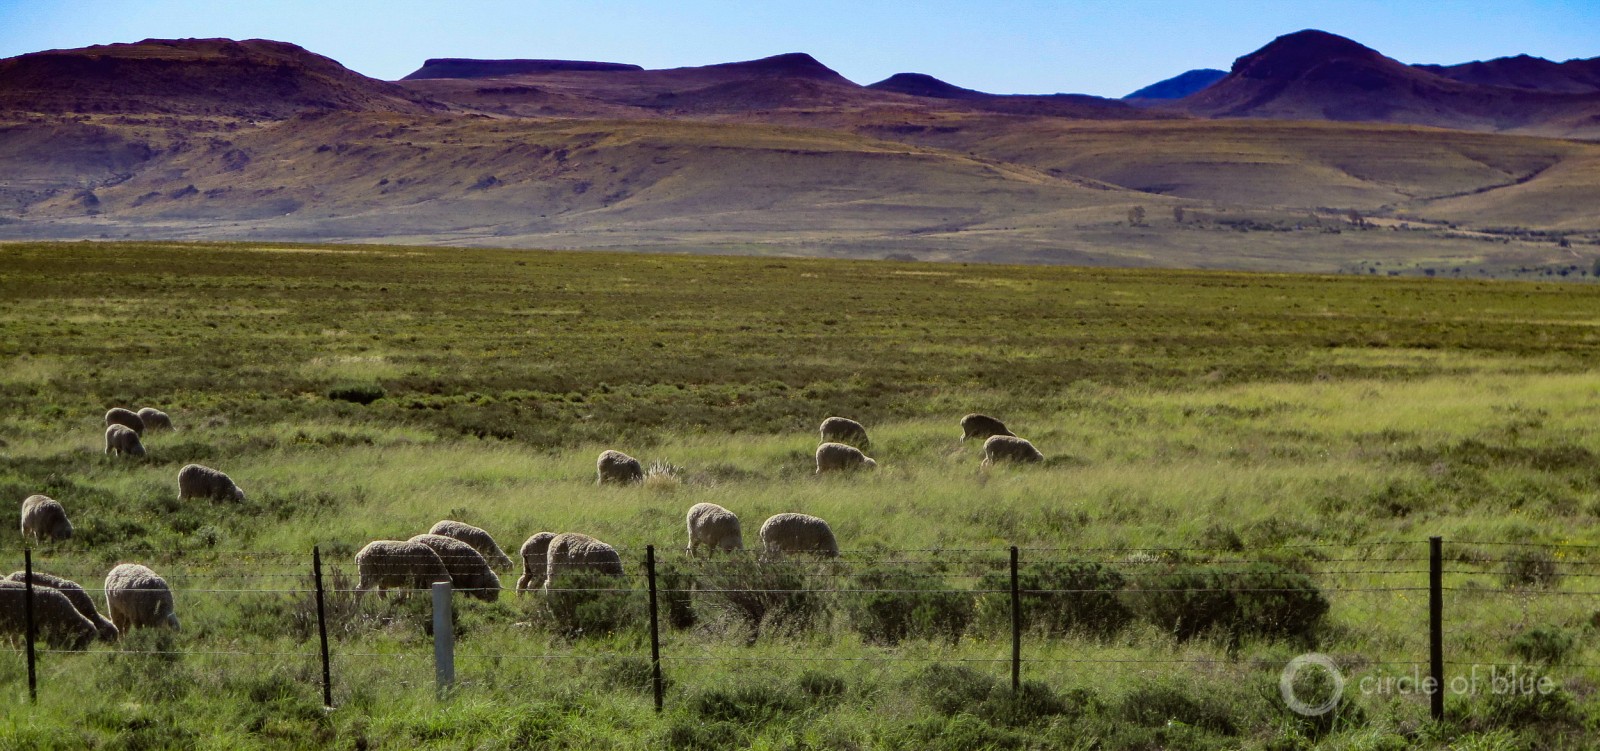 Sheep graze the broad valleys of the Karoo in Northern Cape province.